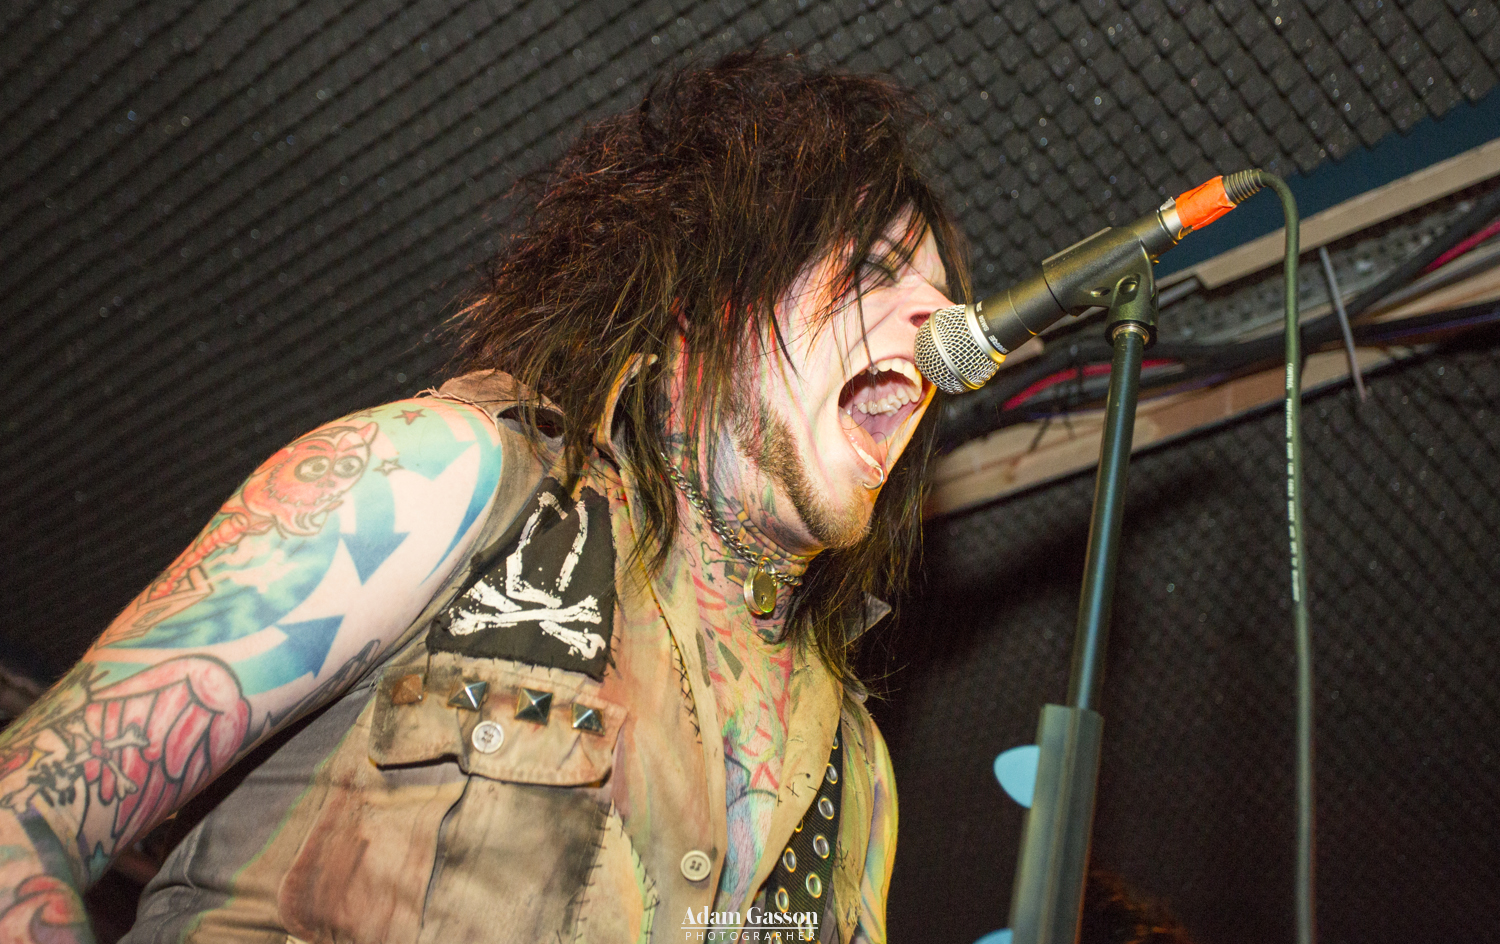 The Defiled live photos